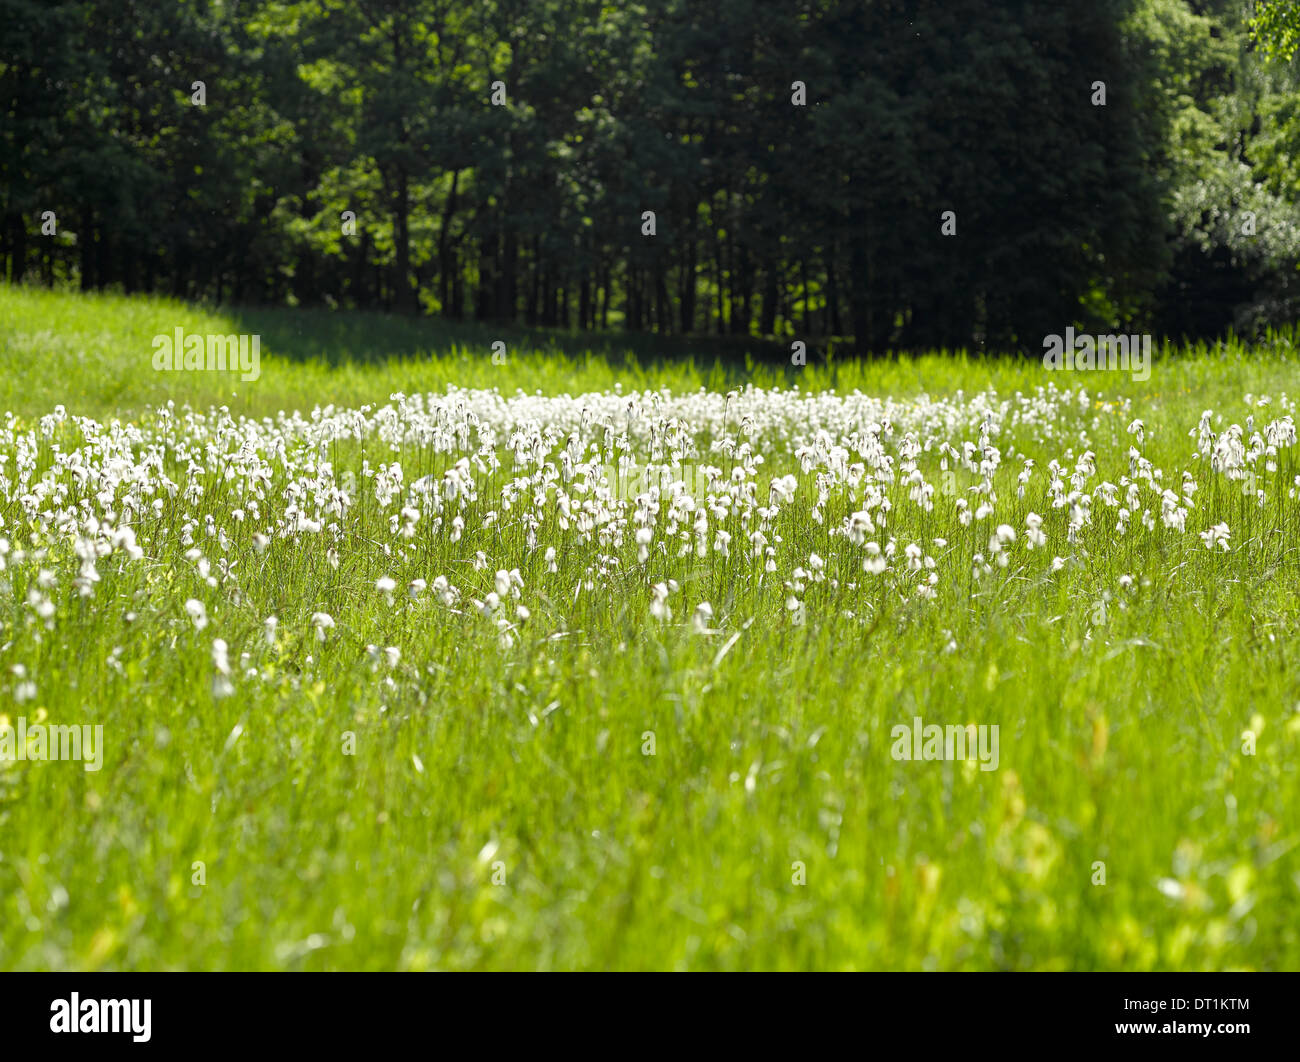 Forest meadow  - natural forest meadow with water flowers Hare's-tail Cottongrass (Eriophorum vaginatum, Scheiden-Wollgras) Stock Photo